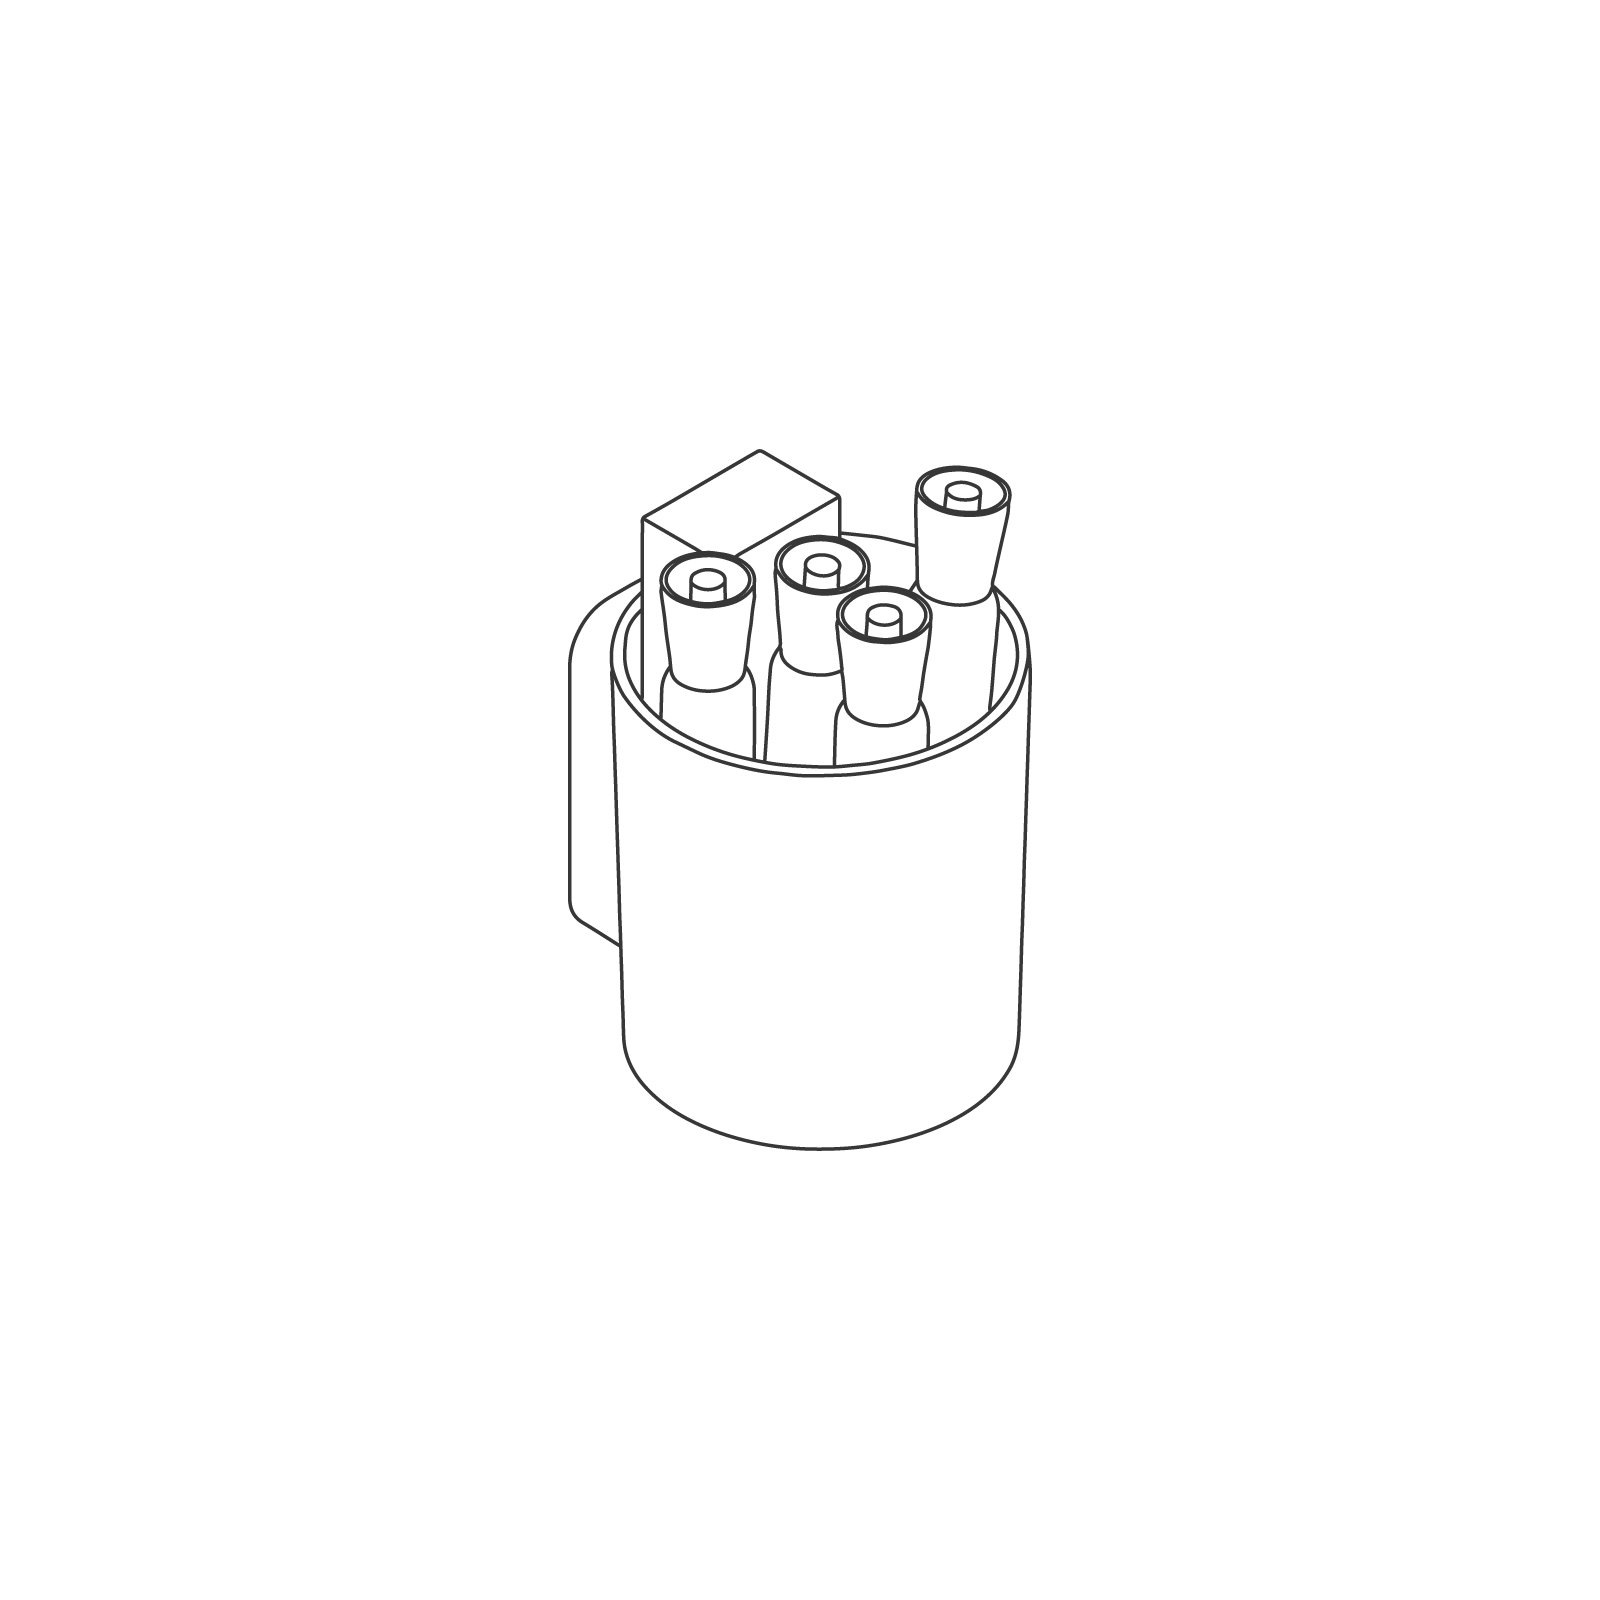 A line drawing - OE1 Marker Cup